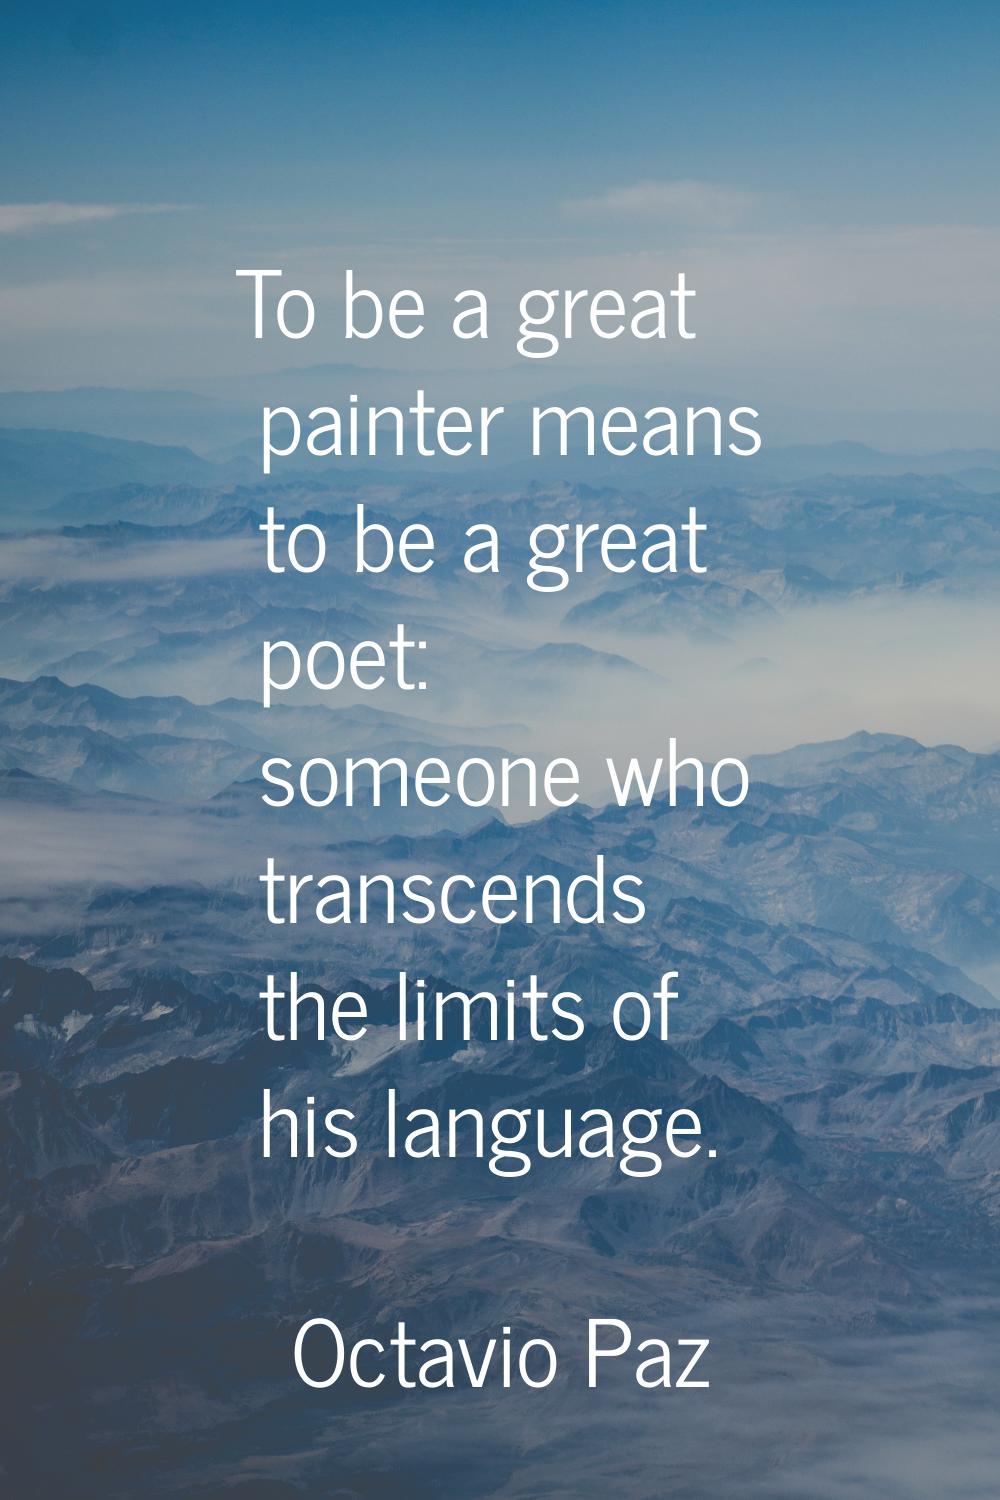 To be a great painter means to be a great poet: someone who transcends the limits of his language.